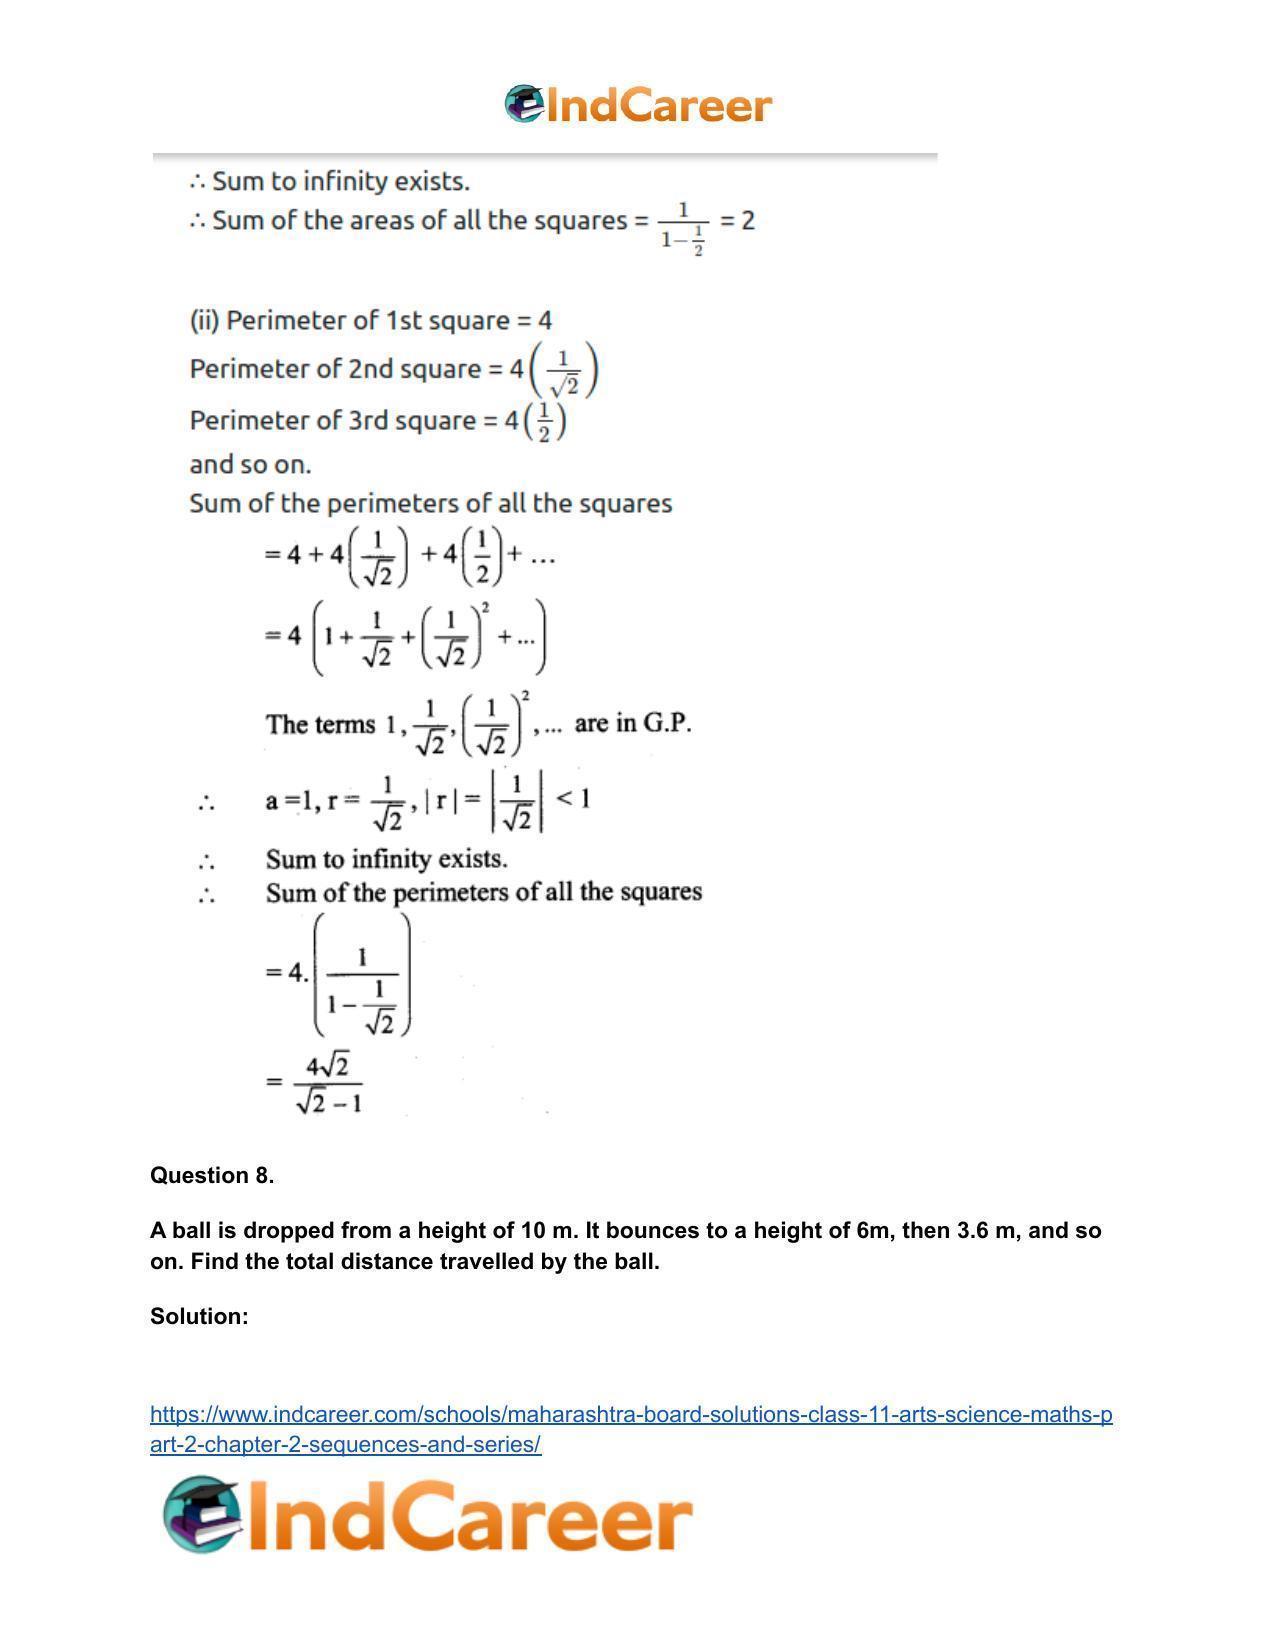 Maharashtra Board Solutions Class 11-Arts & Science Maths (Part 2): Chapter 2- Sequences and Series - Page 49